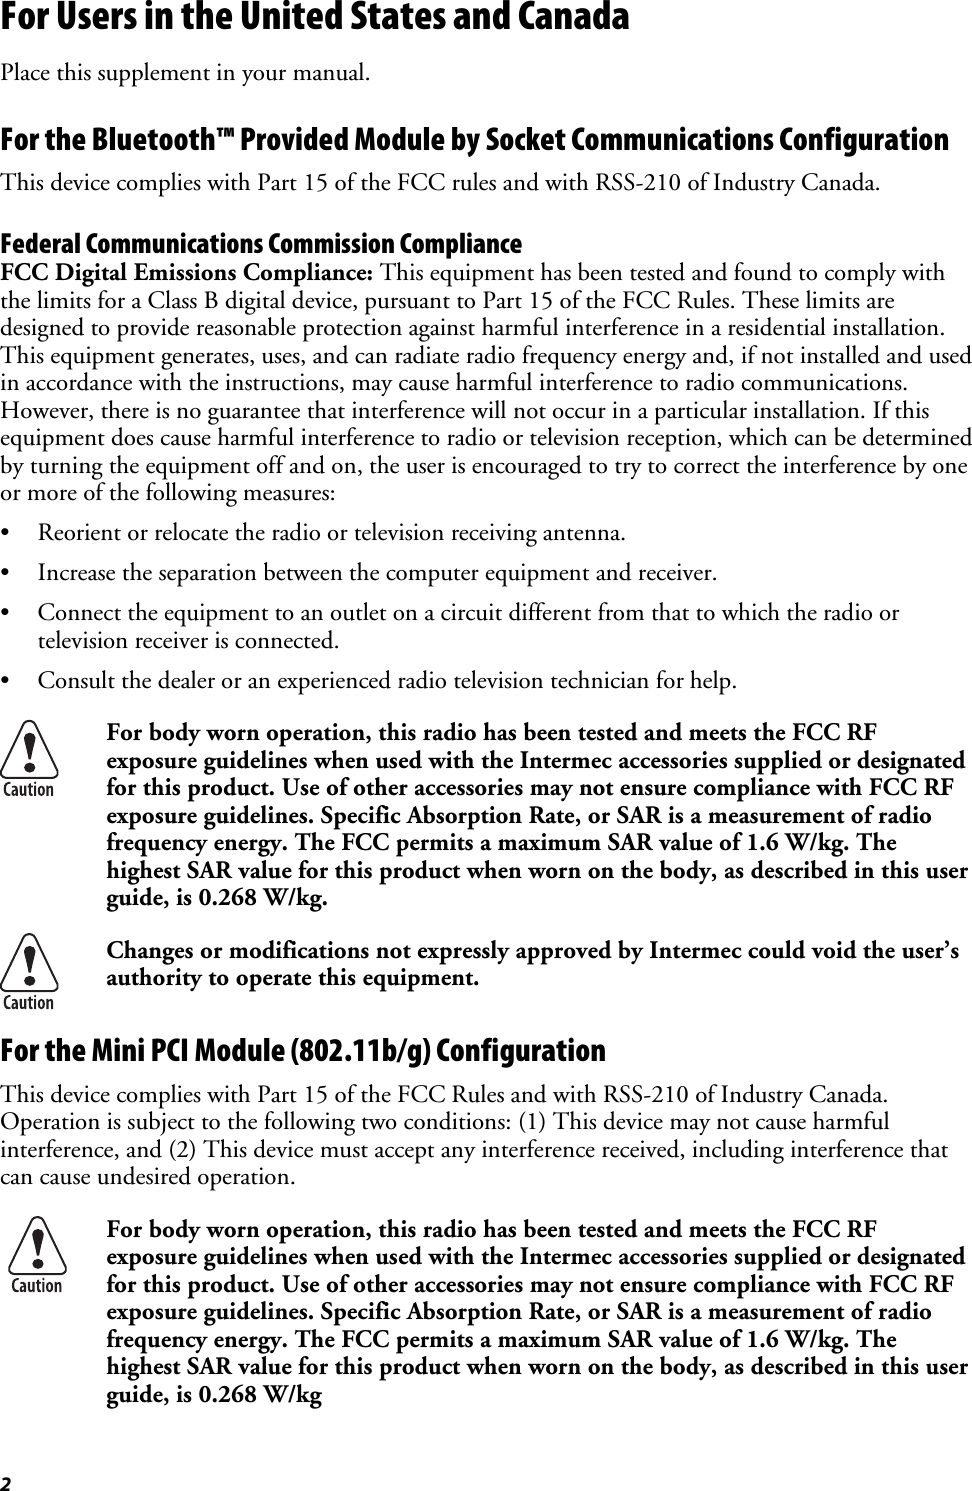 2 For Users in the United States and Canada Place this supplement in your manual. For the Bluetooth™ Provided Module by Socket Communications Configuration This device complies with Part 15 of the FCC rules and with RSS-210 of Industry Canada. Federal Communications Commission Compliance  FCC Digital Emissions Compliance: This equipment has been tested and found to comply with the limits for a Class B digital device, pursuant to Part 15 of the FCC Rules. These limits are designed to provide reasonable protection against harmful interference in a residential installation. This equipment generates, uses, and can radiate radio frequency energy and, if not installed and used in accordance with the instructions, may cause harmful interference to radio communications. However, there is no guarantee that interference will not occur in a particular installation. If this equipment does cause harmful interference to radio or television reception, which can be determined by turning the equipment off and on, the user is encouraged to try to correct the interference by one or more of the following measures: •  Reorient or relocate the radio or television receiving antenna. •  Increase the separation between the computer equipment and receiver. •  Connect the equipment to an outlet on a circuit different from that to which the radio or television receiver is connected. •  Consult the dealer or an experienced radio television technician for help.  For body worn operation, this radio has been tested and meets the FCC RF exposure guidelines when used with the Intermec accessories supplied or designated for this product. Use of other accessories may not ensure compliance with FCC RF exposure guidelines. Specific Absorption Rate, or SAR is a measurement of radio frequency energy. The FCC permits a maximum SAR value of 1.6 W/kg. The highest SAR value for this product when worn on the body, as described in this user guide, is 0.268 W/kg.  Changes or modifications not expressly approved by Intermec could void the user’s authority to operate this equipment. For the Mini PCI Module (802.11b/g) Configuration This device complies with Part 15 of the FCC Rules and with RSS-210 of Industry Canada. Operation is subject to the following two conditions: (1) This device may not cause harmful interference, and (2) This device must accept any interference received, including interference that can cause undesired operation.  For body worn operation, this radio has been tested and meets the FCC RF exposure guidelines when used with the Intermec accessories supplied or designated for this product. Use of other accessories may not ensure compliance with FCC RF exposure guidelines. Specific Absorption Rate, or SAR is a measurement of radio frequency energy. The FCC permits a maximum SAR value of 1.6 W/kg. The highest SAR value for this product when worn on the body, as described in this user guide, is 0.268 W/kg 